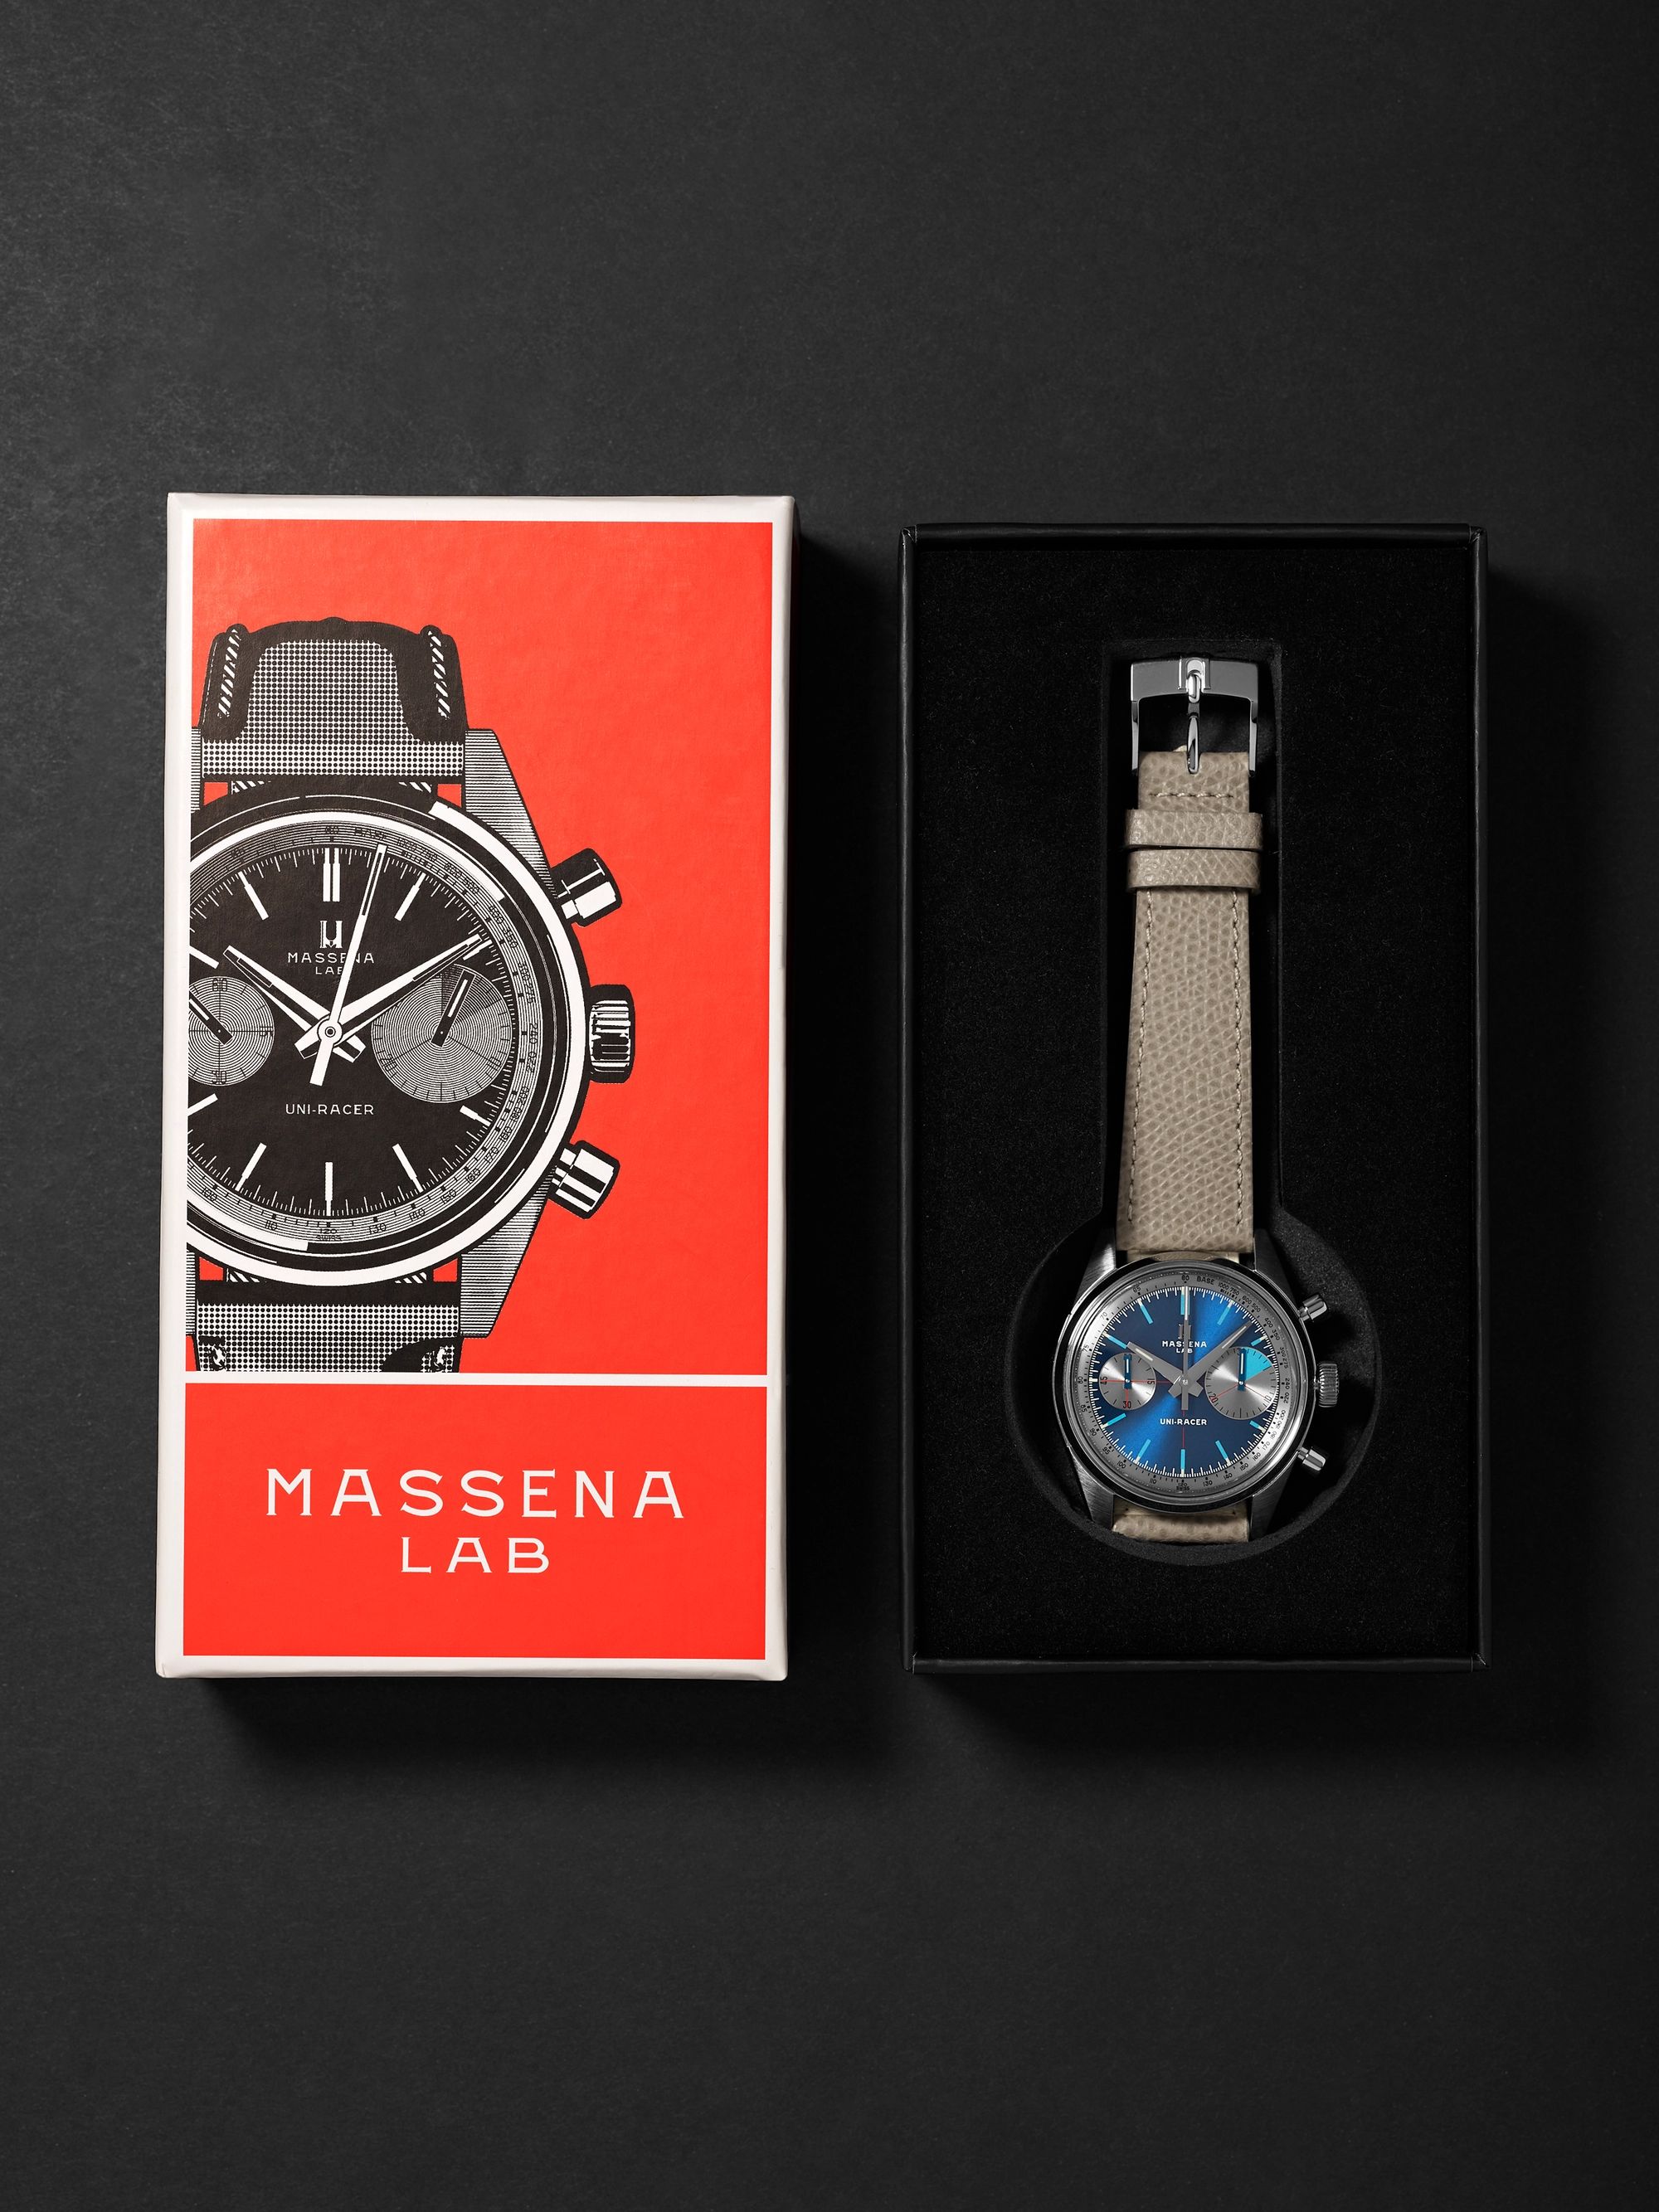 MASSENA LAB Uni-Racer Limited Edition Hand-Wound Chronograph 39mm Stainless Steel and Cross-Grain Leather Watch, Ref. No. UR-001-CRU